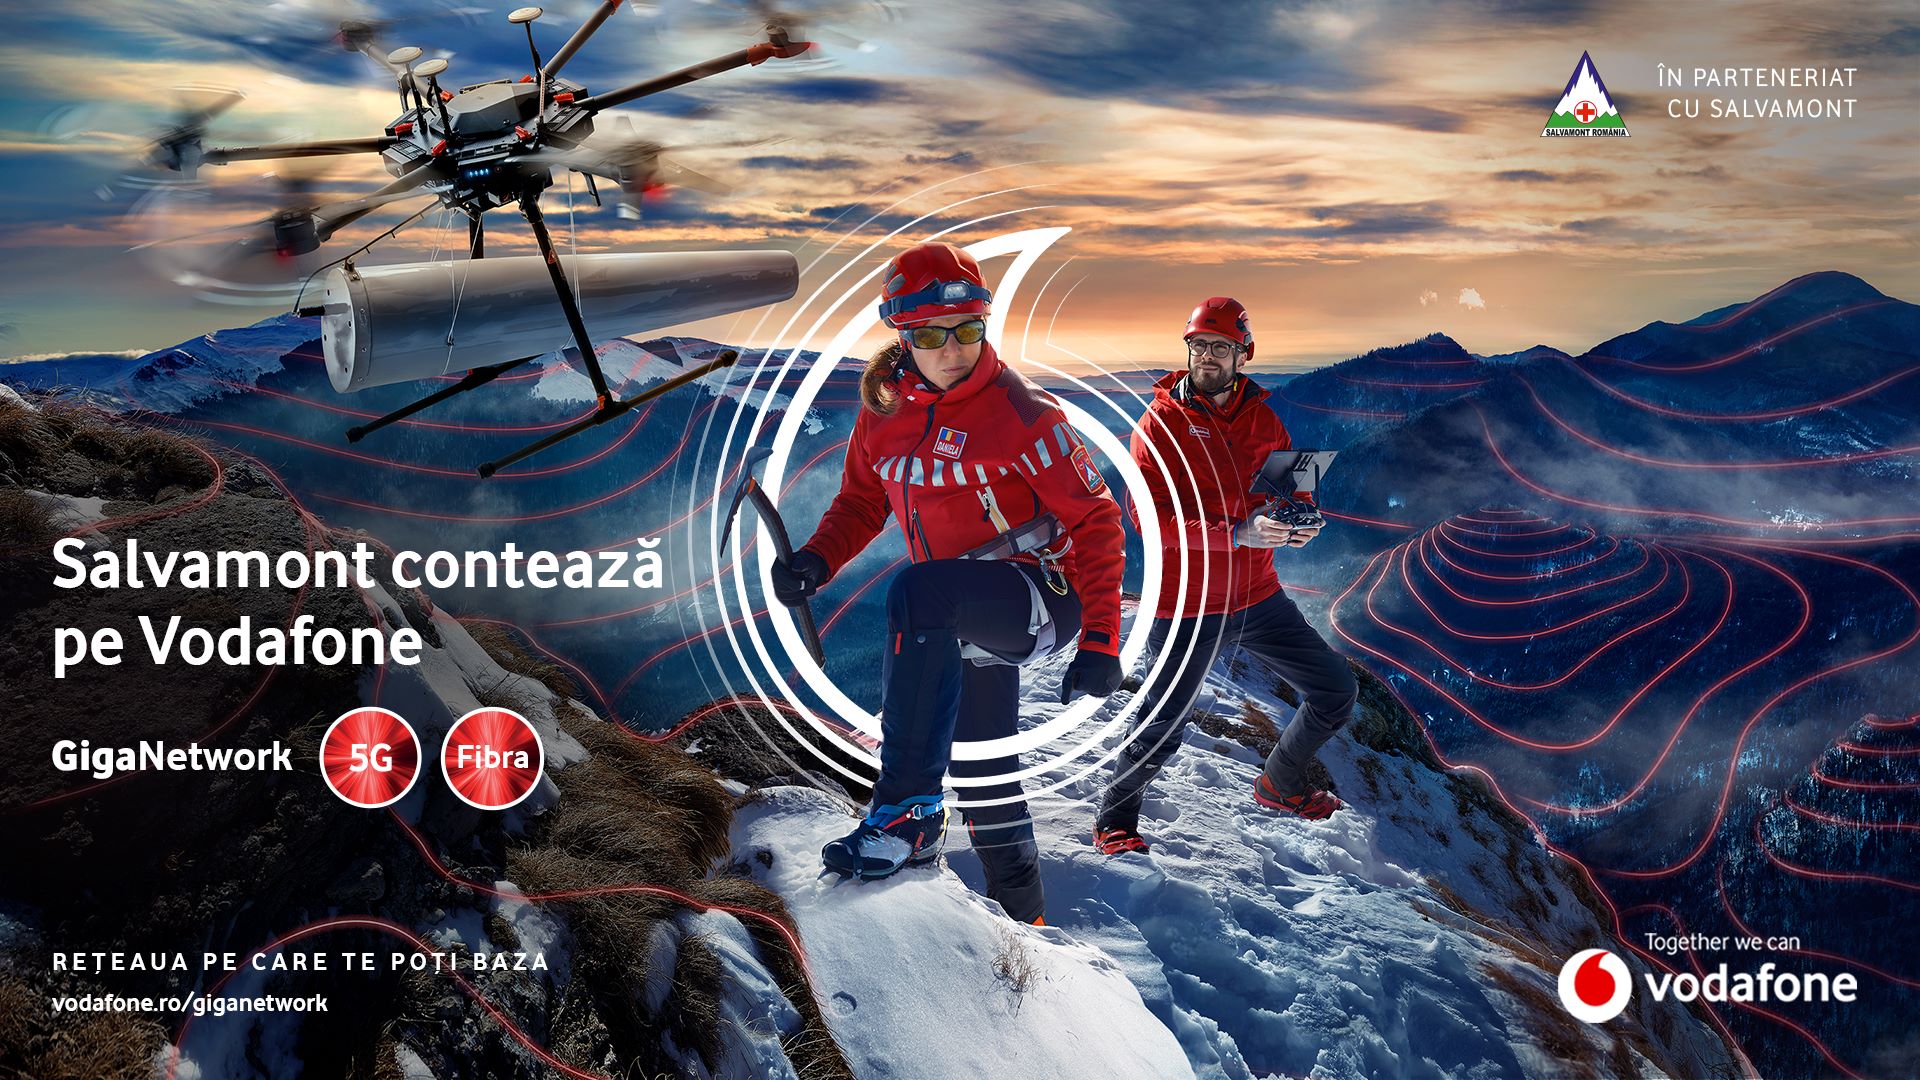 Vodafone and Salvamont launch two state-of-the-art  search and rescue technologies powered by GigaNetwork